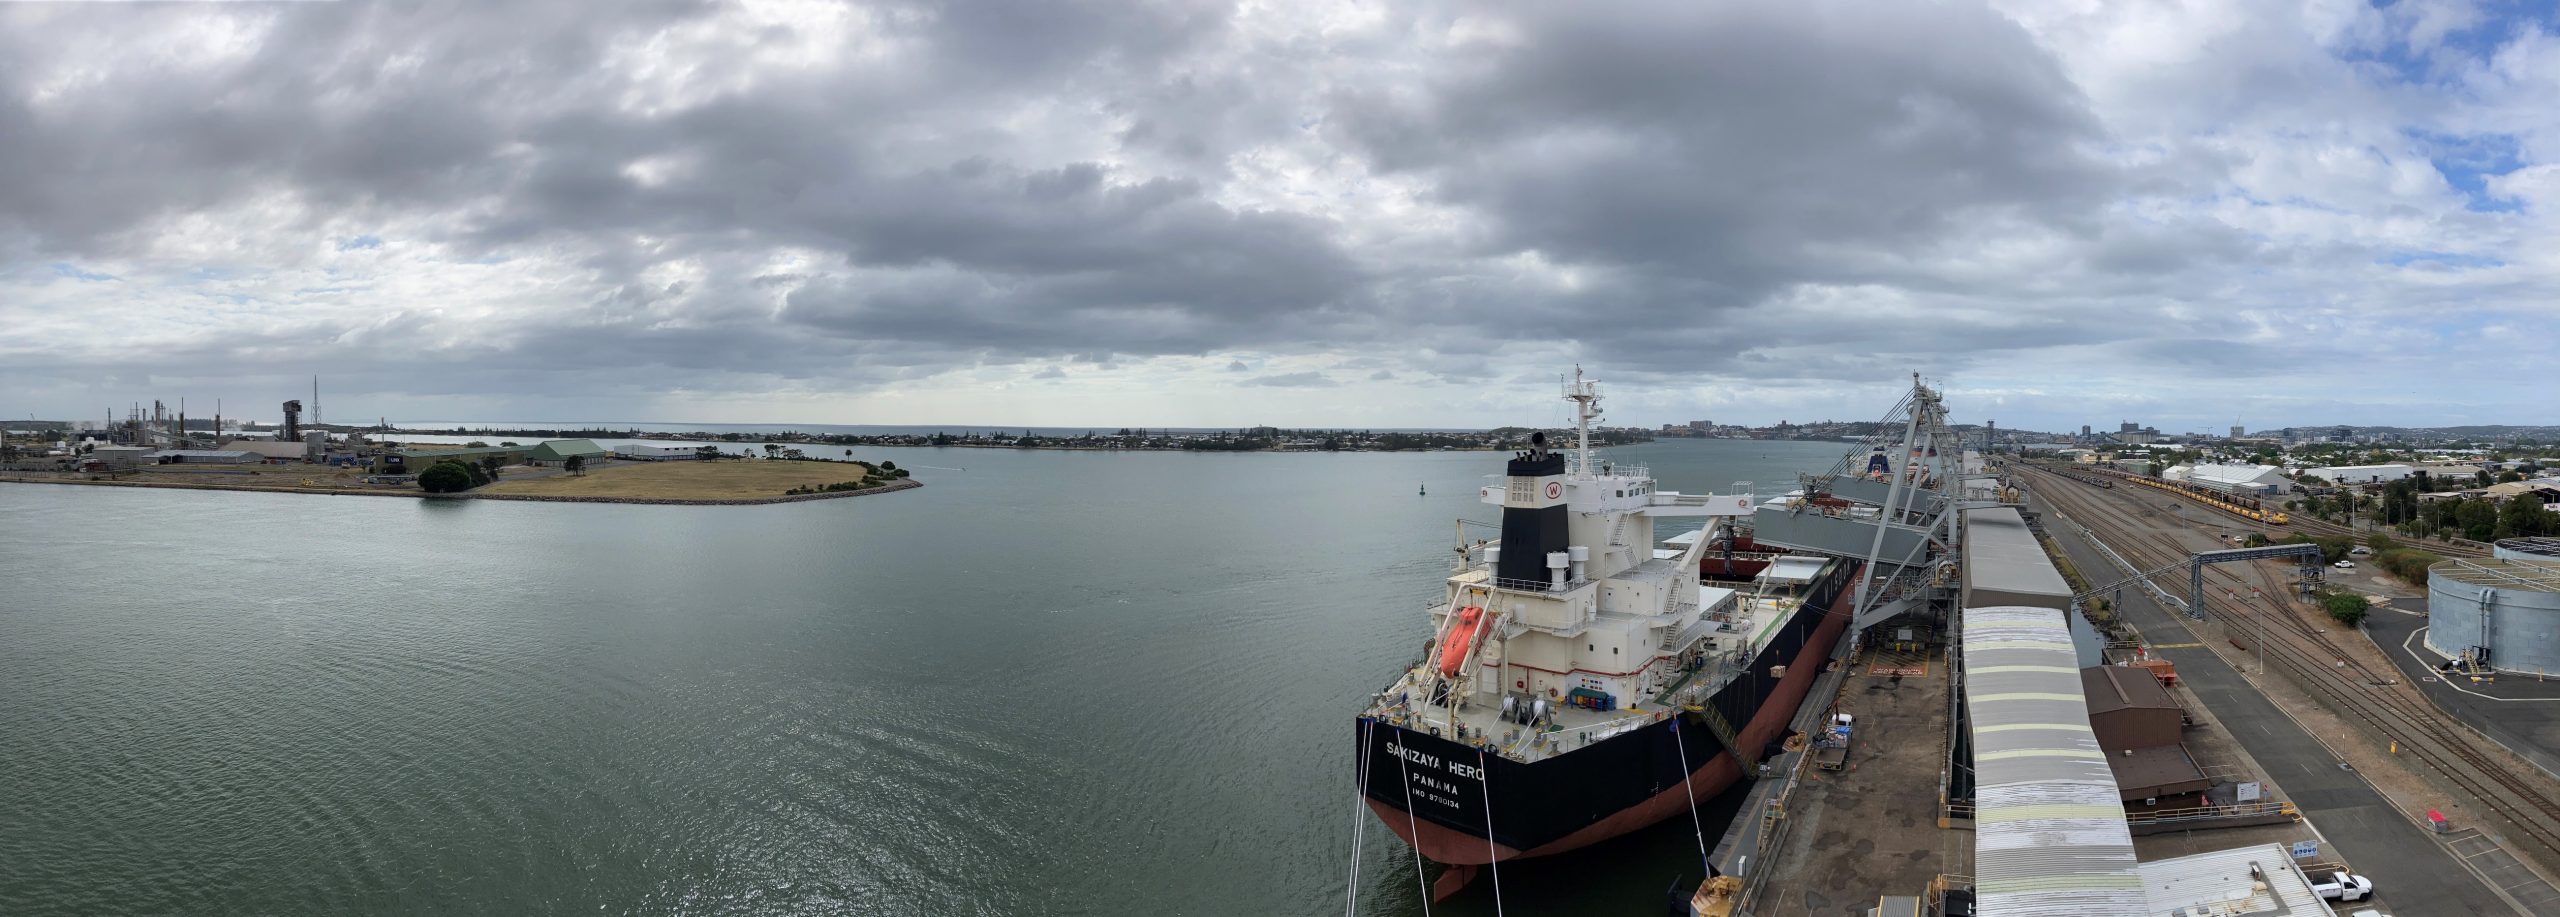 Landscape View of Newcastle Harbour captured by the NATA Accredited Environmental Monitoring specialist Port Hunter Environmental